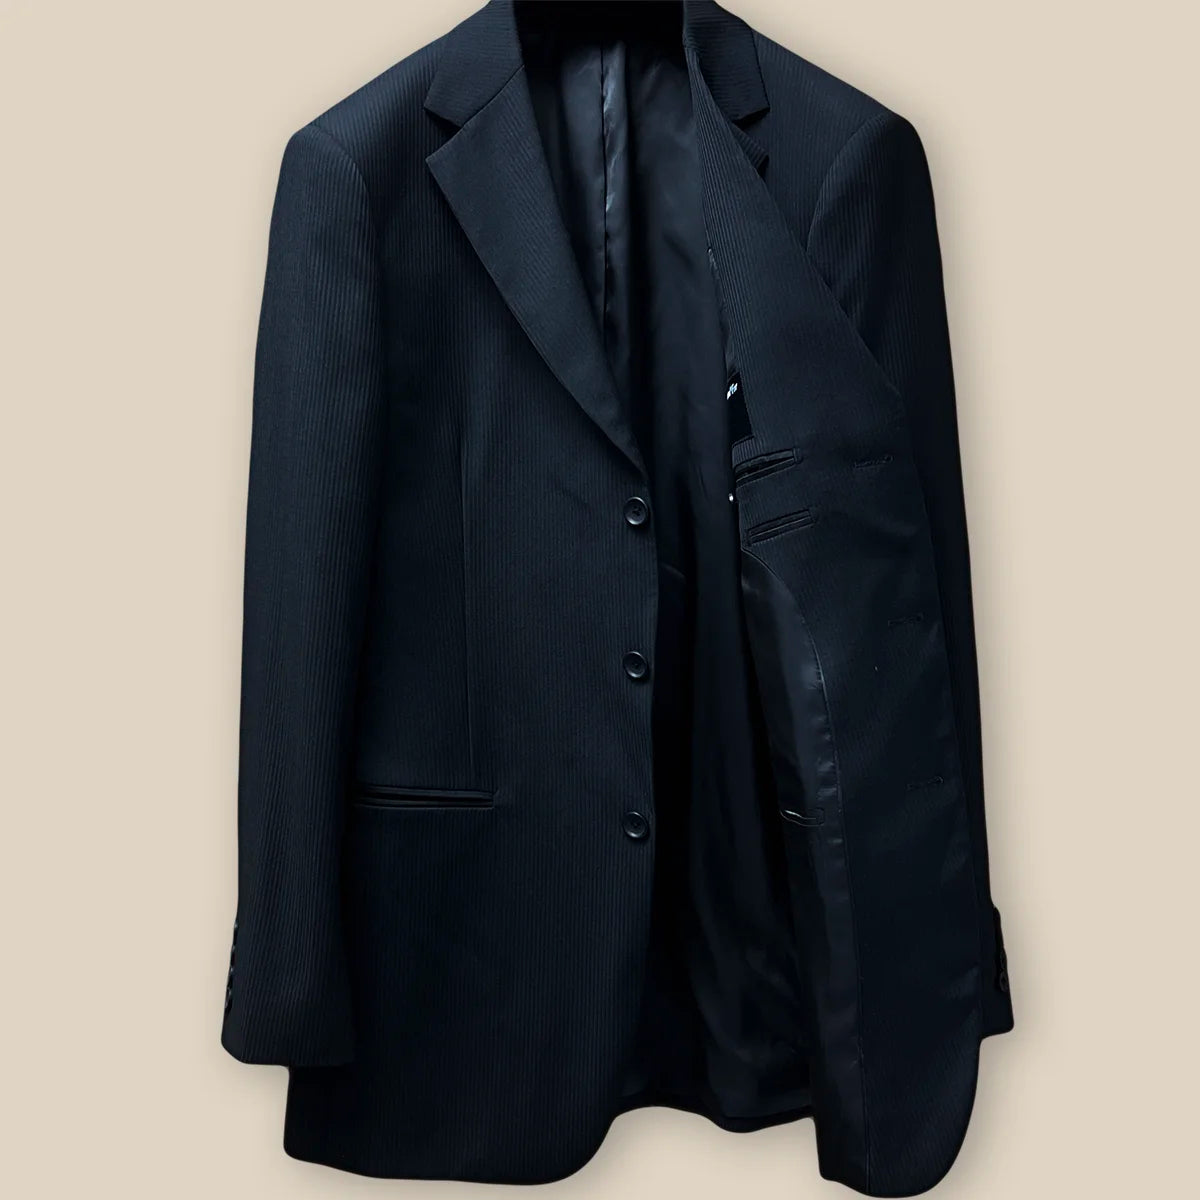 Inside view of the left side of the jacket, featuring the smooth black Bemberg lining and inner pocket.